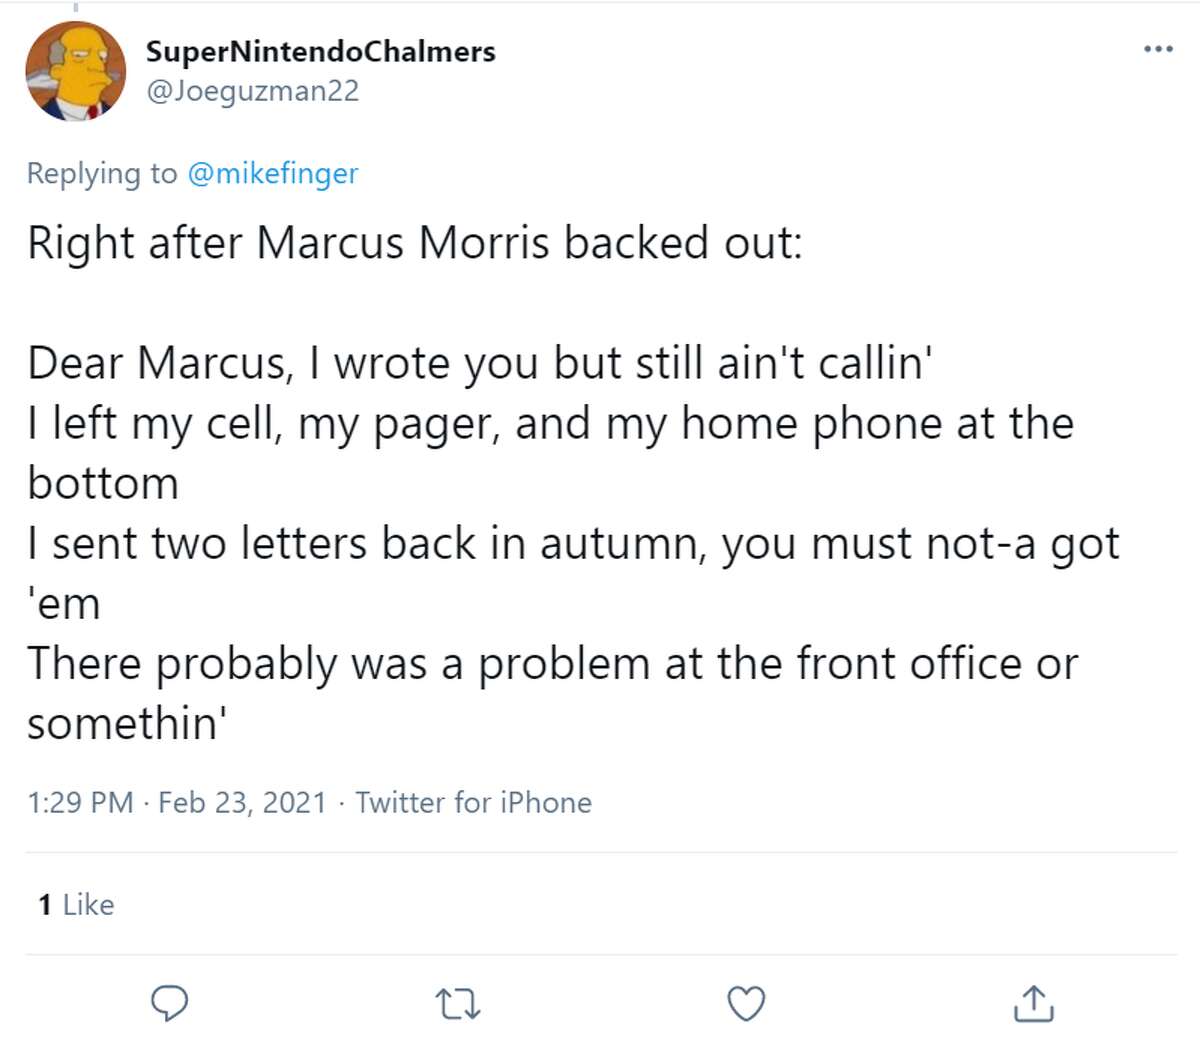 @Joeguzman22: Right after Marcus Morris backed out: Dear Marcus, I wrote you but still ain't callin'I left my cell, my pager, and my home phone at the bottomI sent two letters back in autumn, you must not-a got 'emThere probably was a problem at the front office or somethin'